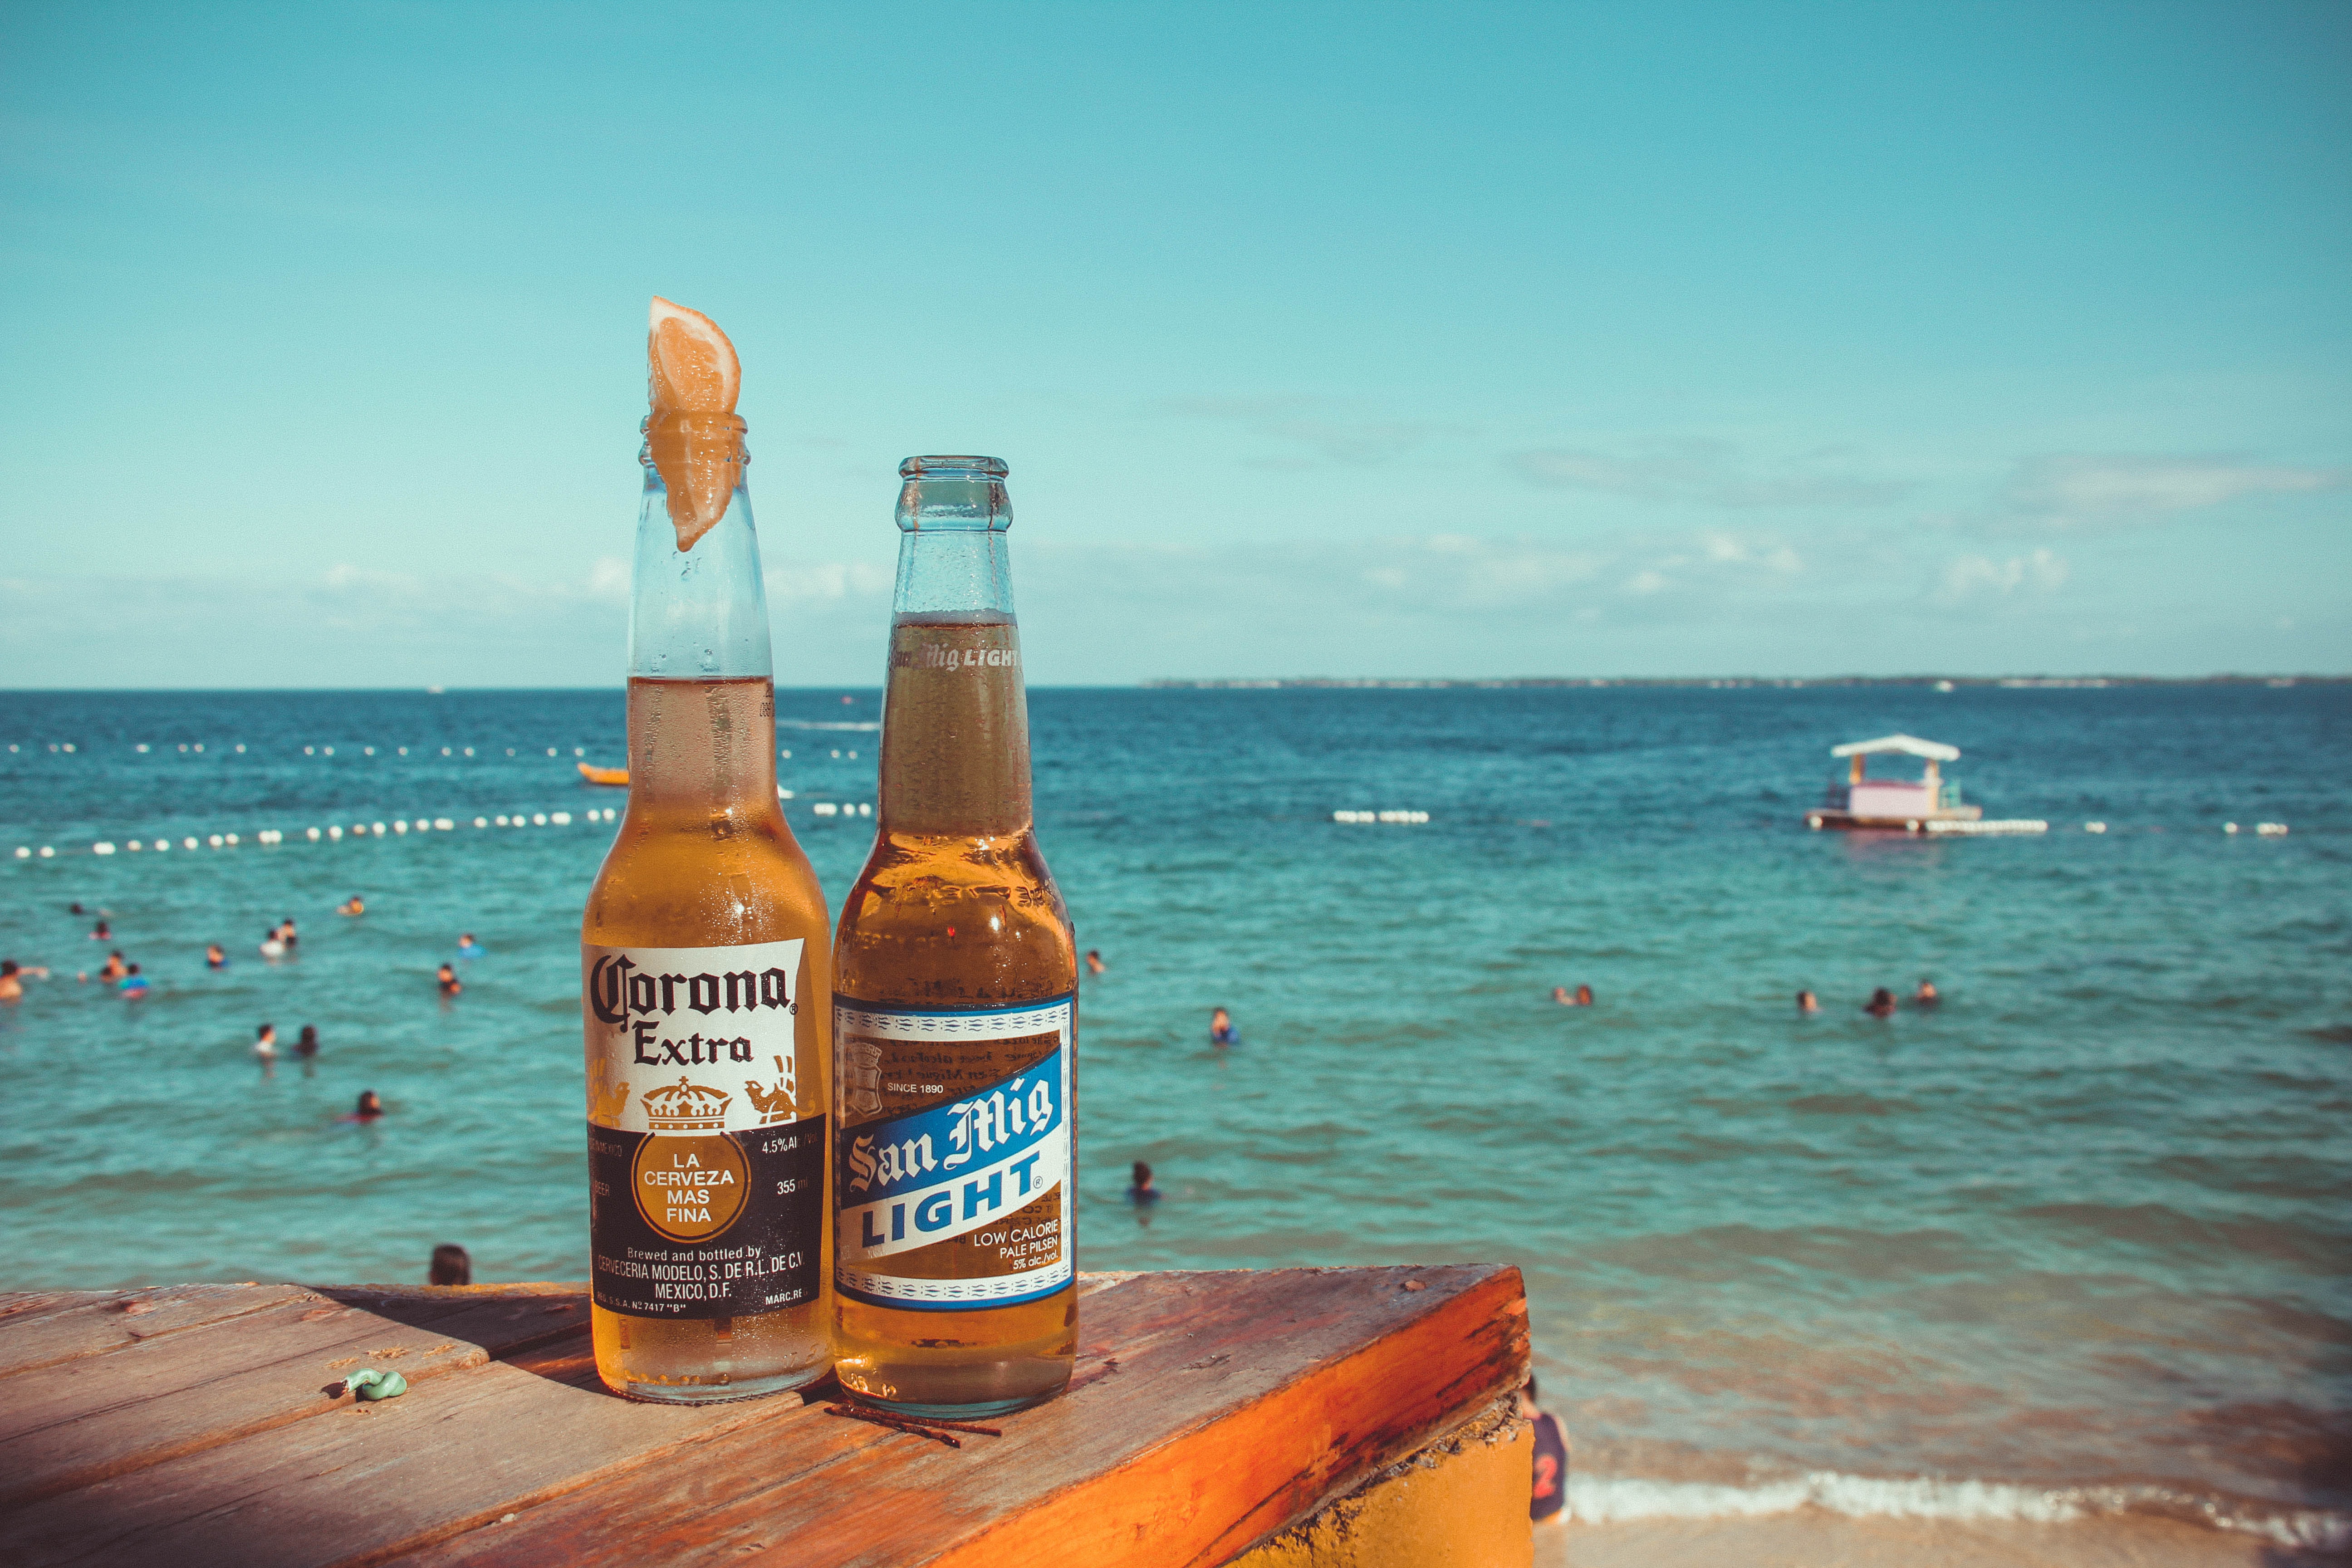 Two corona extra and san mig light beers on top of brown wooden plank near beach photo